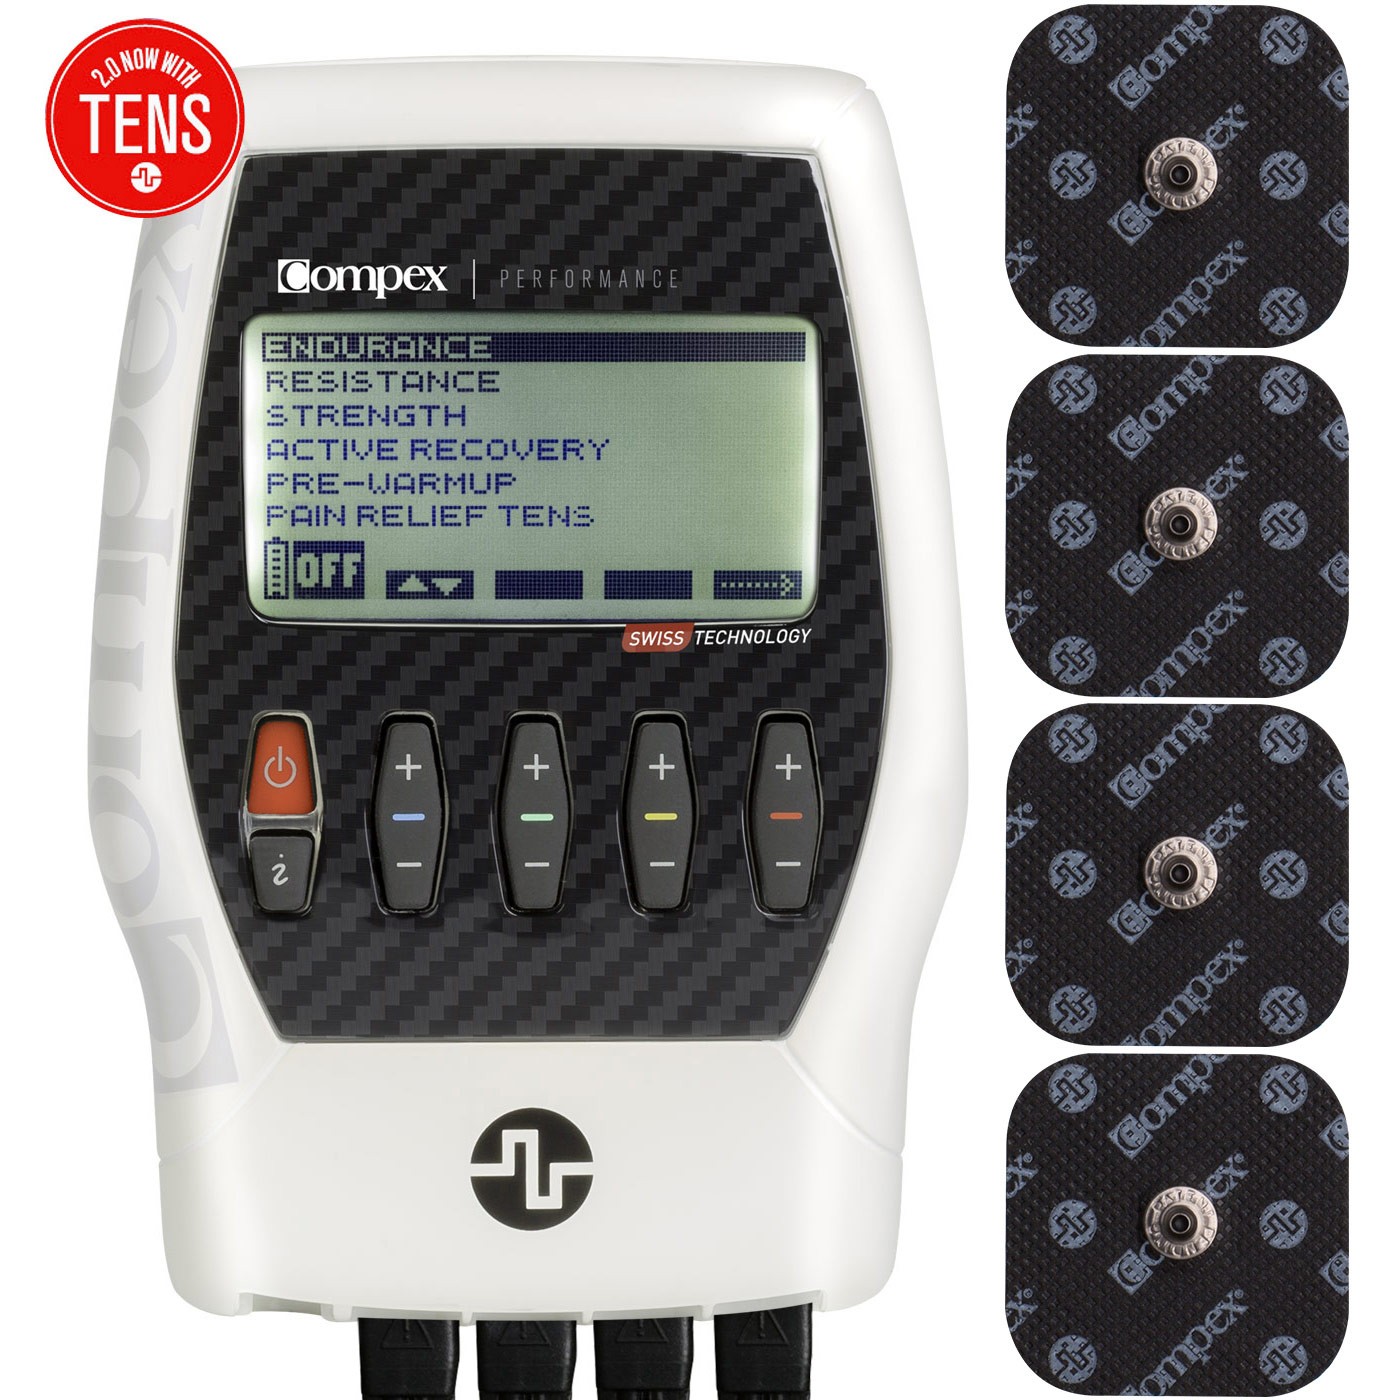 Compex Performance 2 0 Muscle Stimulator With Tens Kit